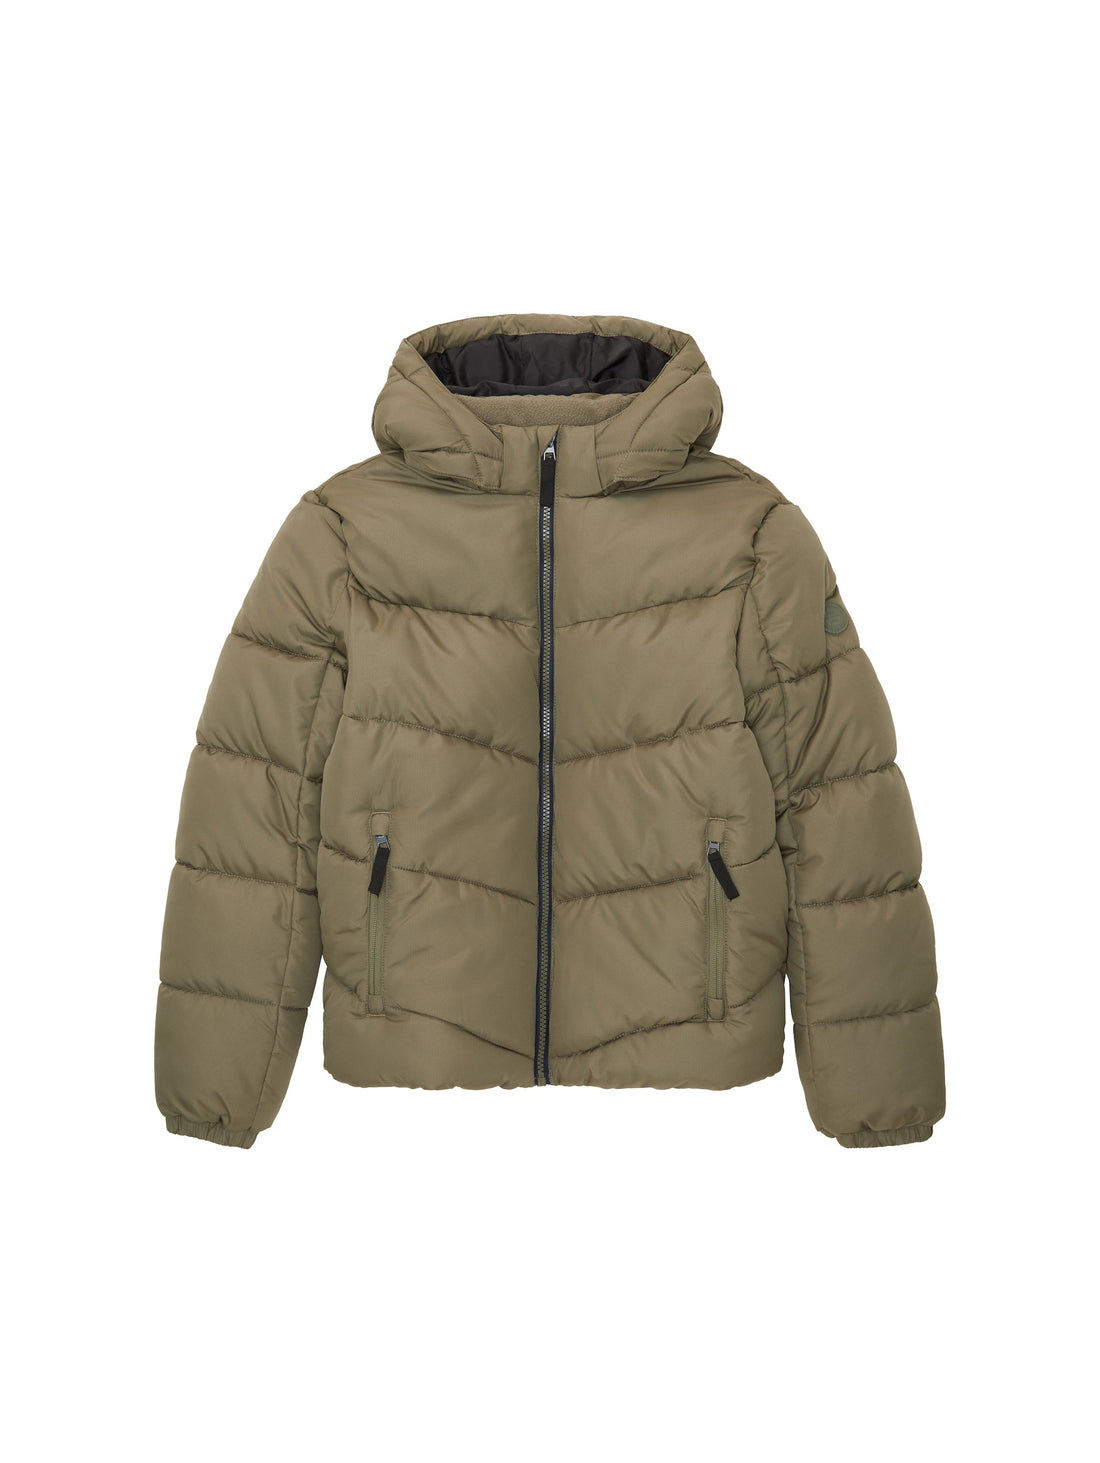 Heavy Puffer Jacket With Hood_1038540_10415_01